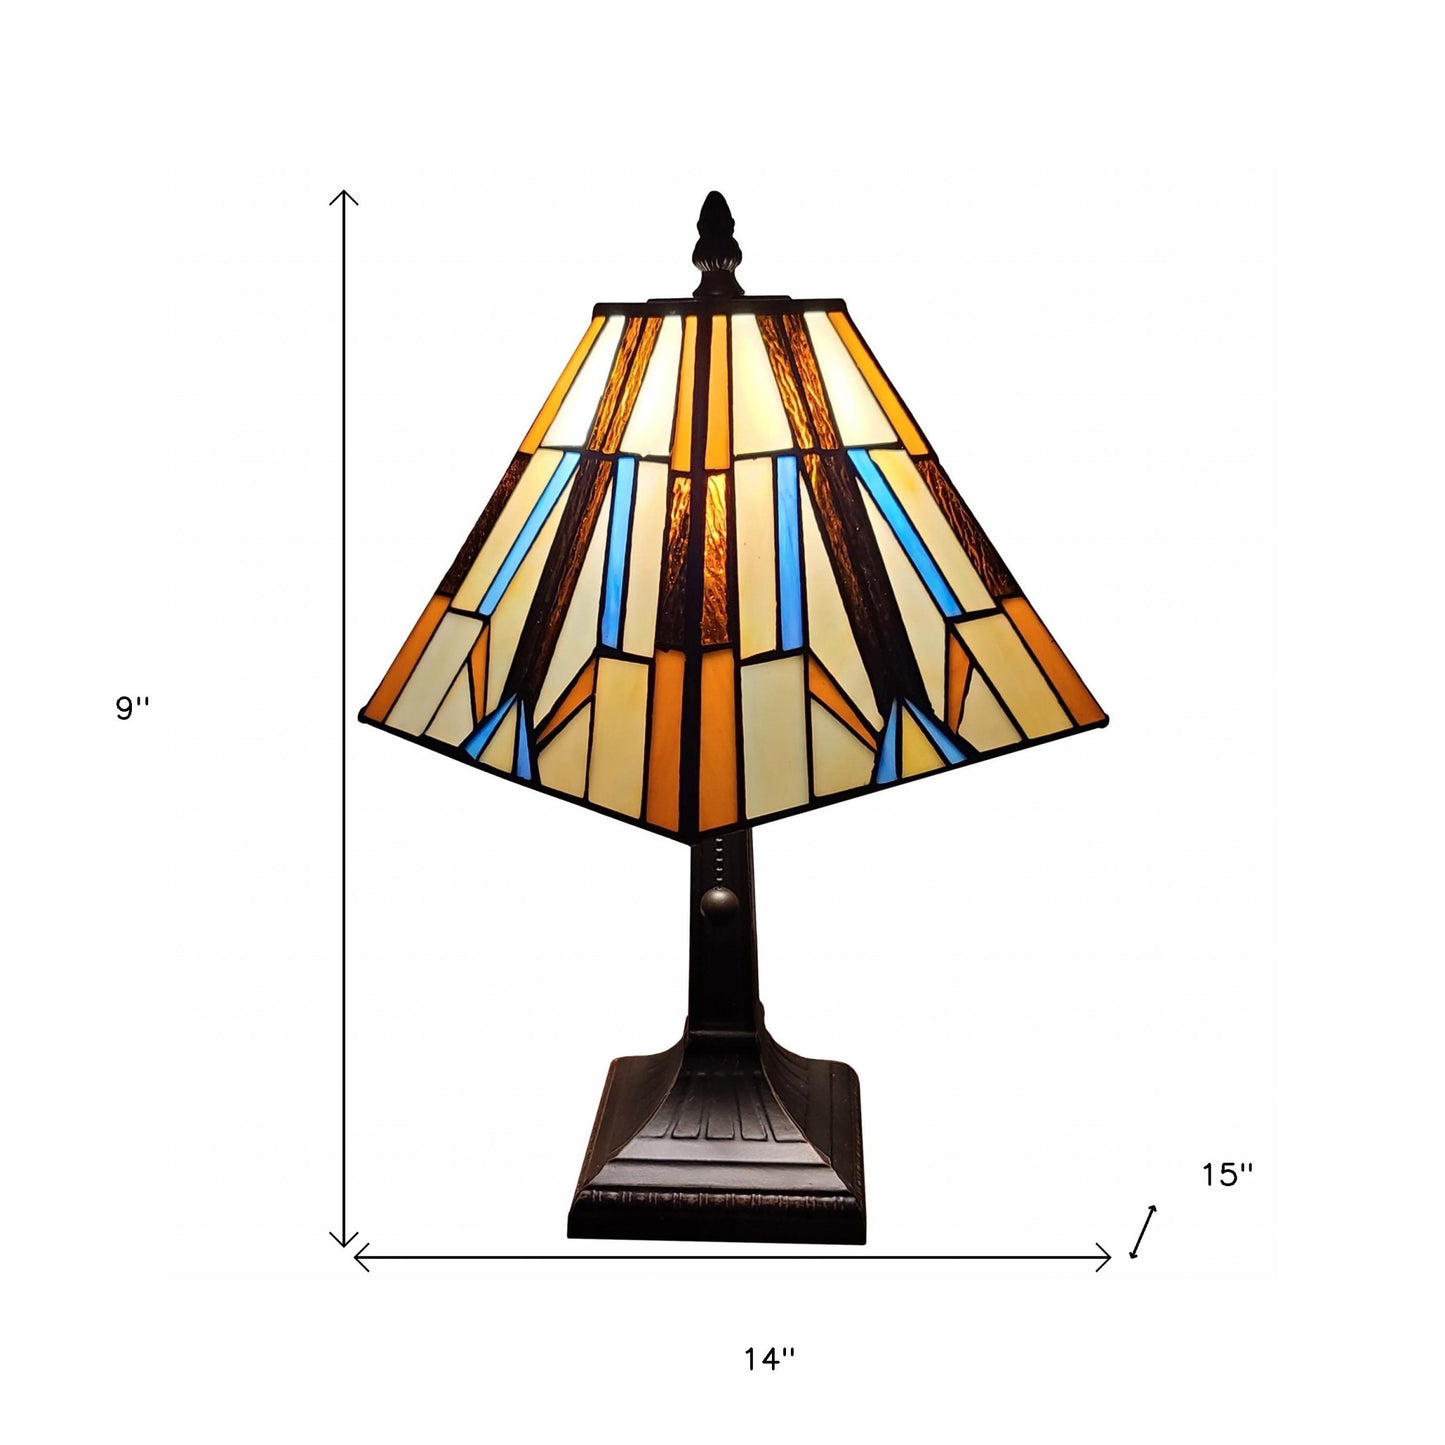 16" Tiffany Style Mission Style Squared Shade Table Lamp